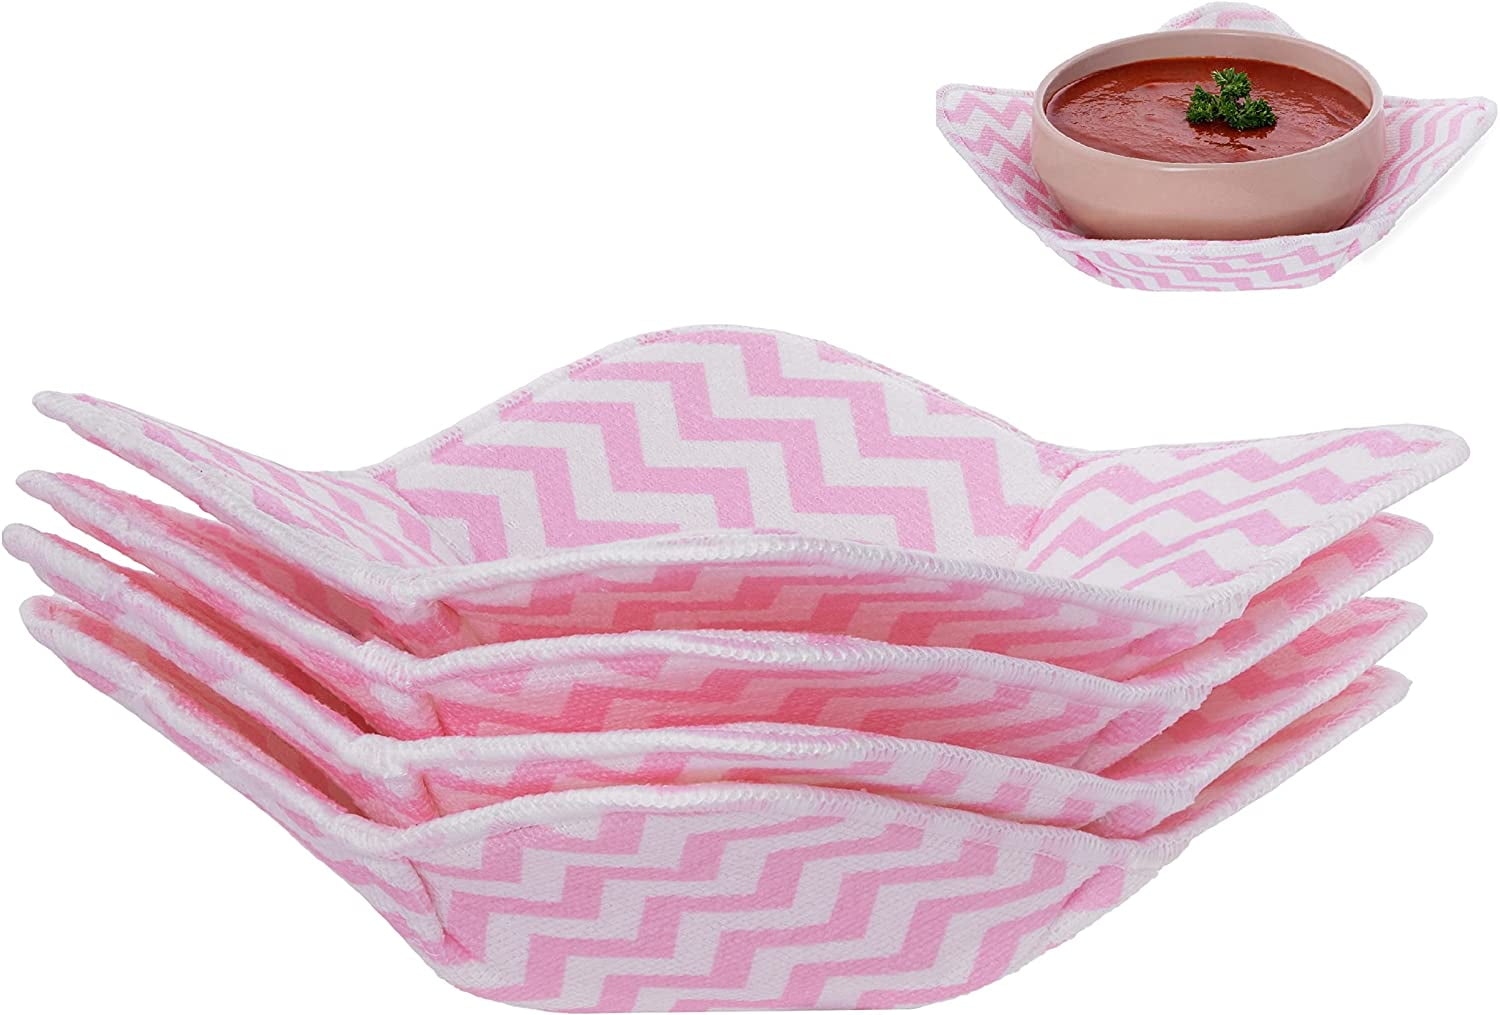 Pirate Kitchen, Bowl Cozy, Bowl Cozies for Microwave, Pink Pirate